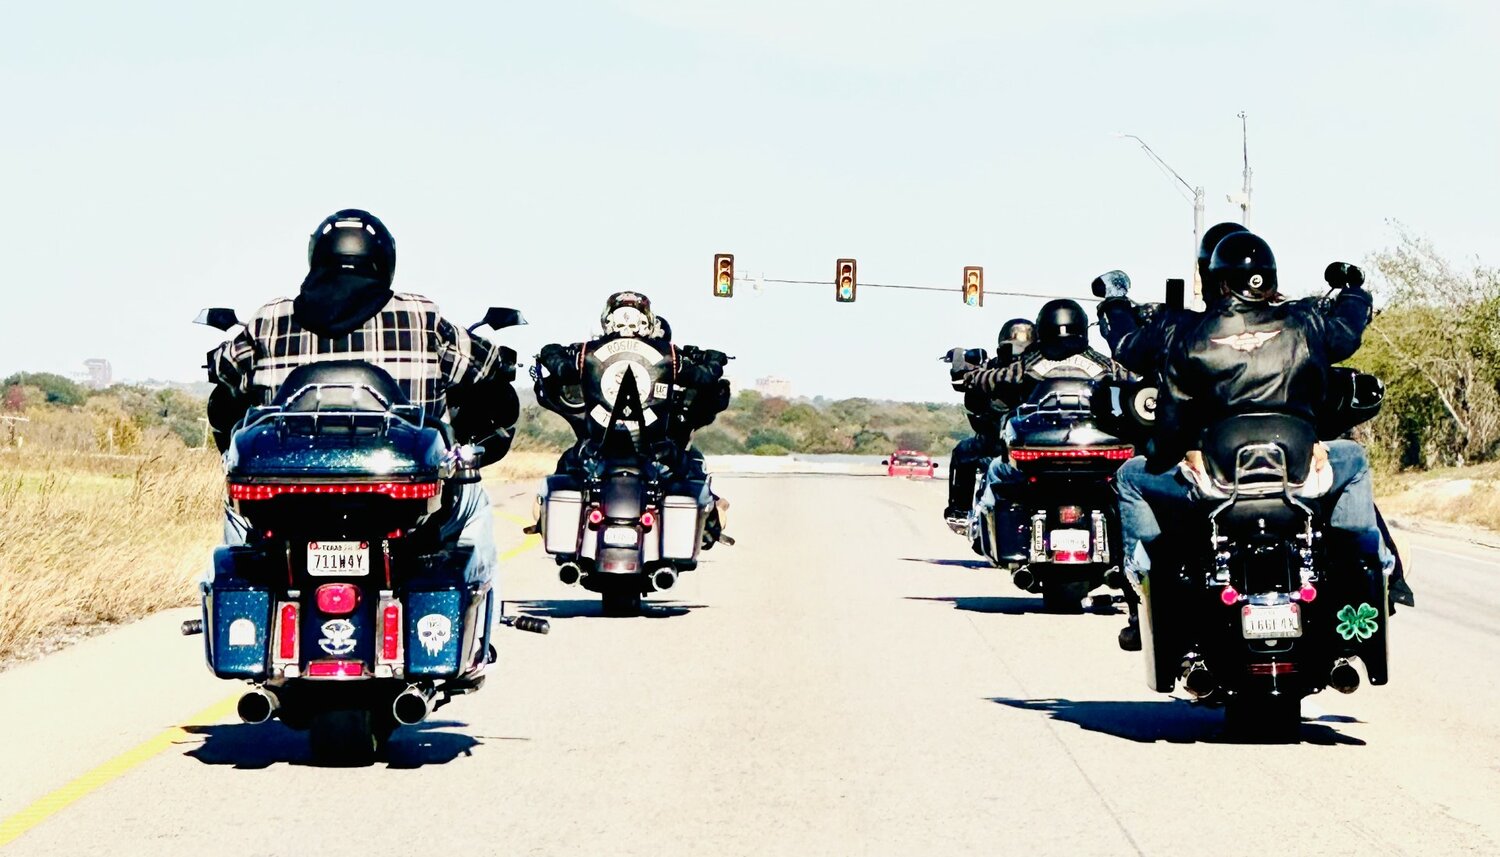 Following a community motorcycle ride on Sunday, Dec. 3, local members of Rogue 22 MC will be accepting donations for Mission Granbury from 1-6 p.m. at Lowe’s Home Improvement, 1021 E. U.S. Hwy. 377.